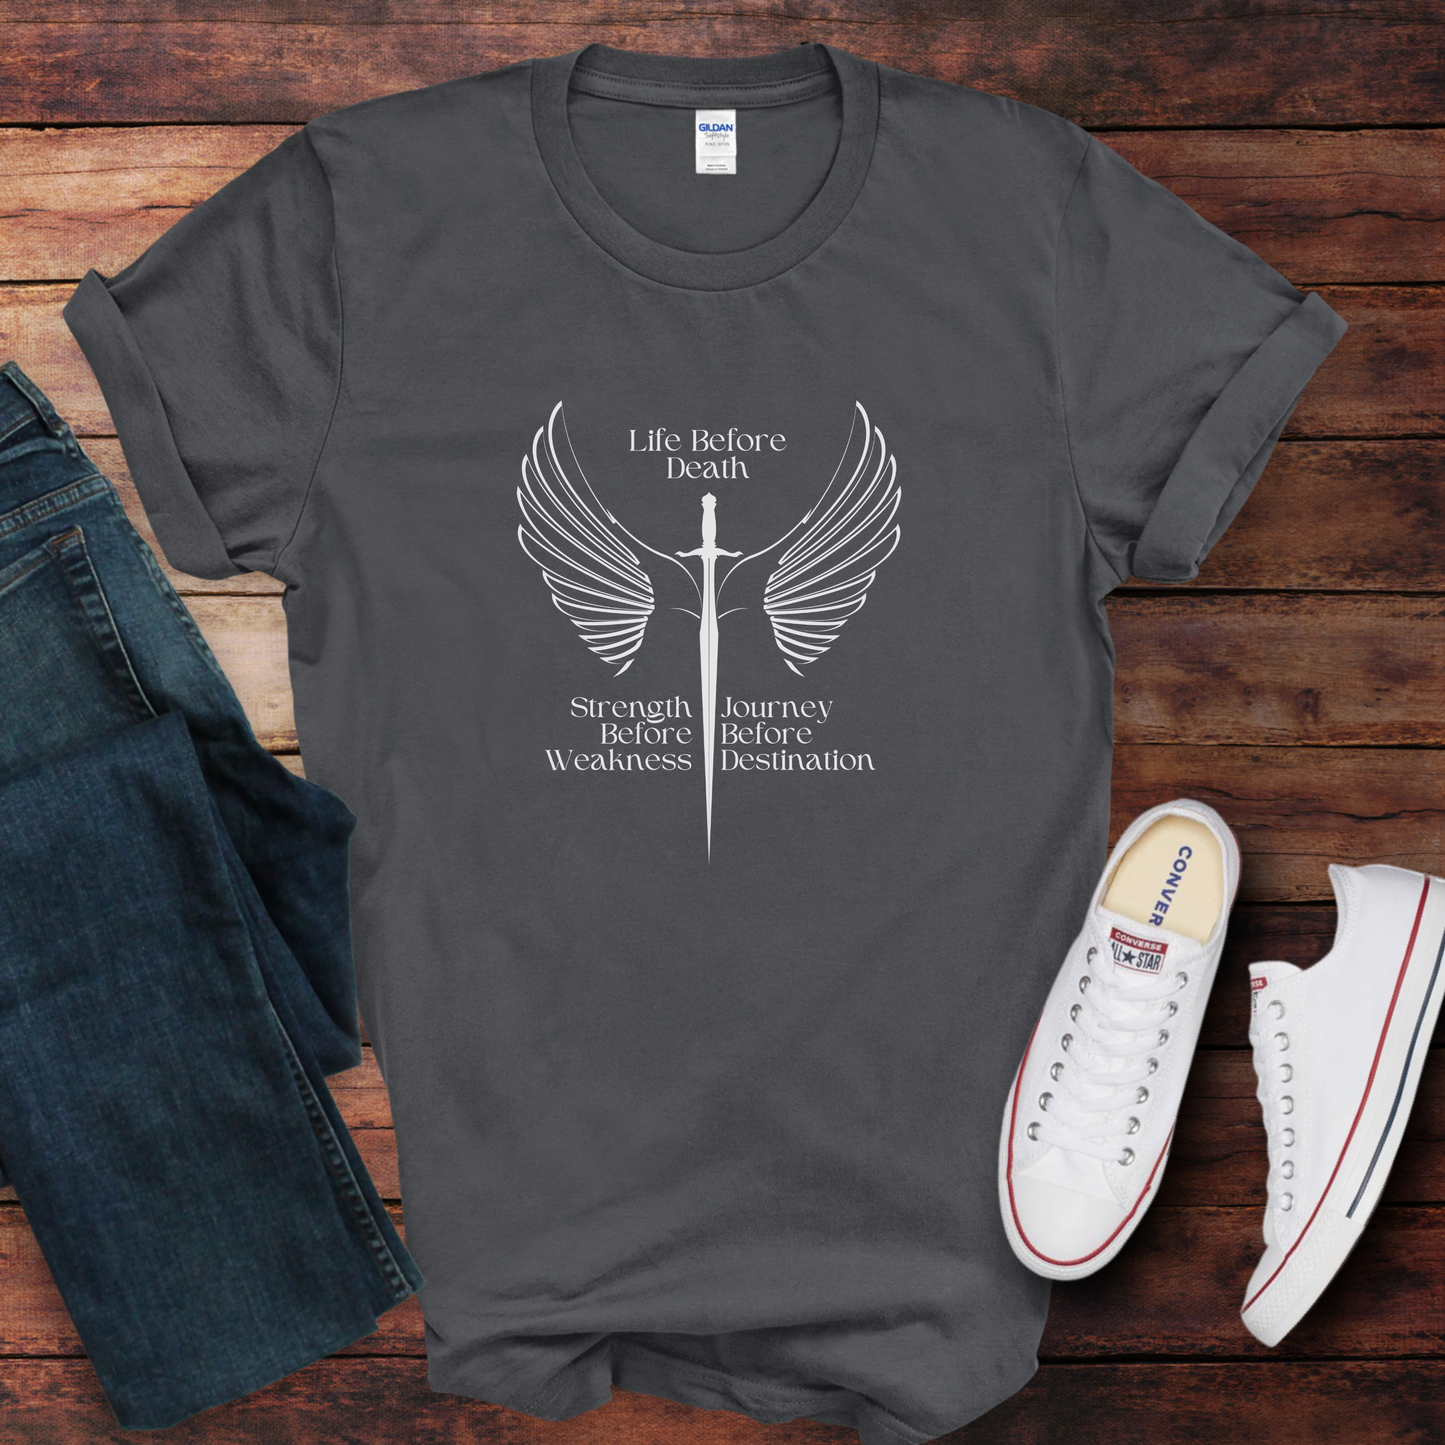 Brandon Sanderson Shirt, Life Before Death. Strength Before Weakness. Journey Before Destination. Way of Kings - T-Shirt